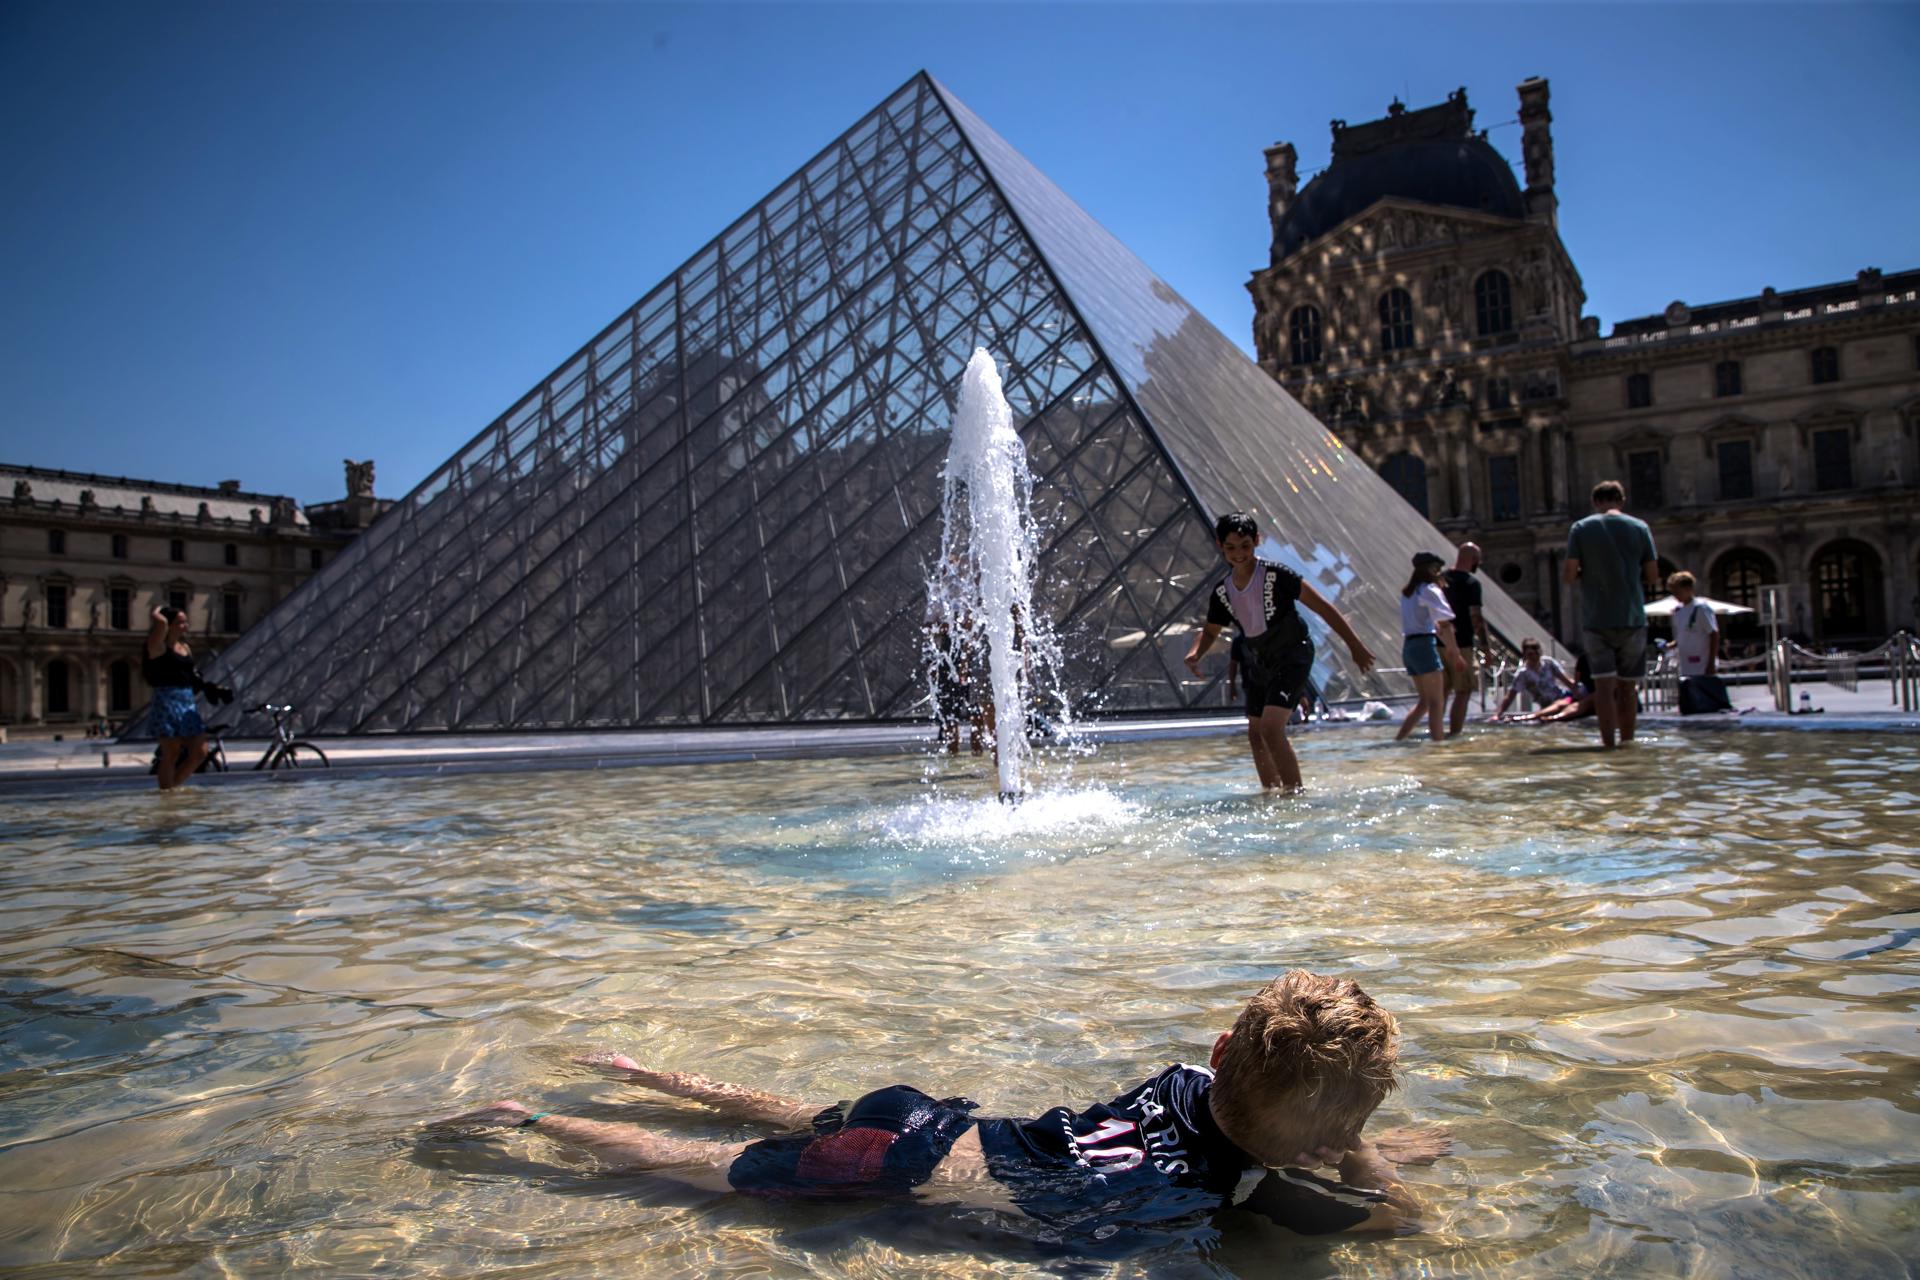 Parisians and tourists cool down in the fountains of the Louvre Museum's Pyramide in Paris, France, 19 July 2022. EFE/EPA/FILE/CHRISTOPHE PETIT TESSON
RESUMEN FOTOS DEL AÑO DE EPA 2022 JULIO